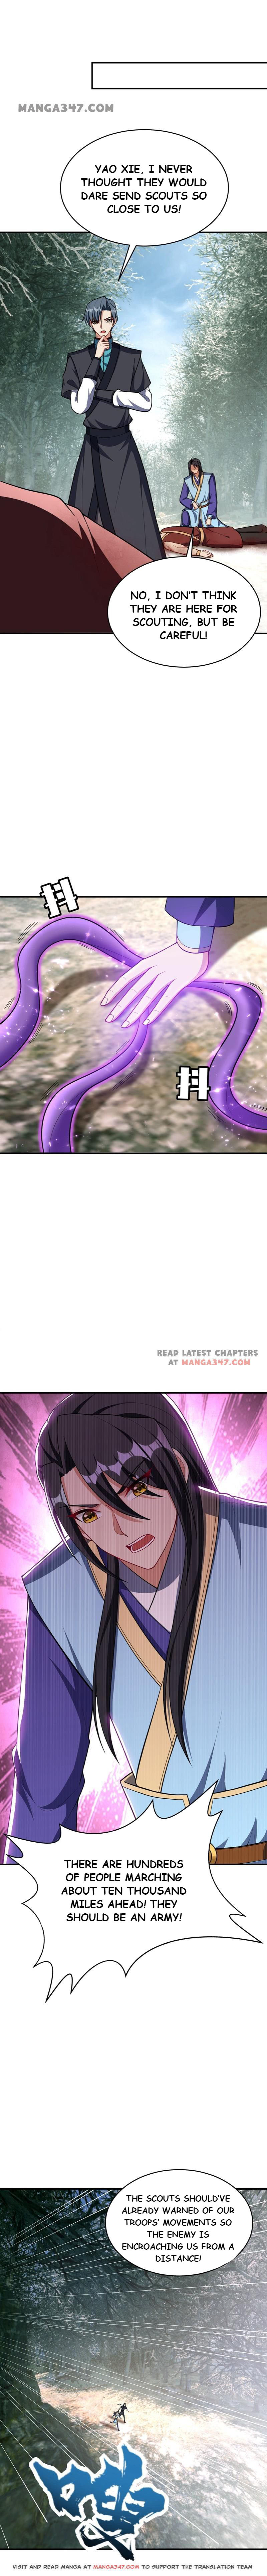 Rise of The Demon King Chap 133